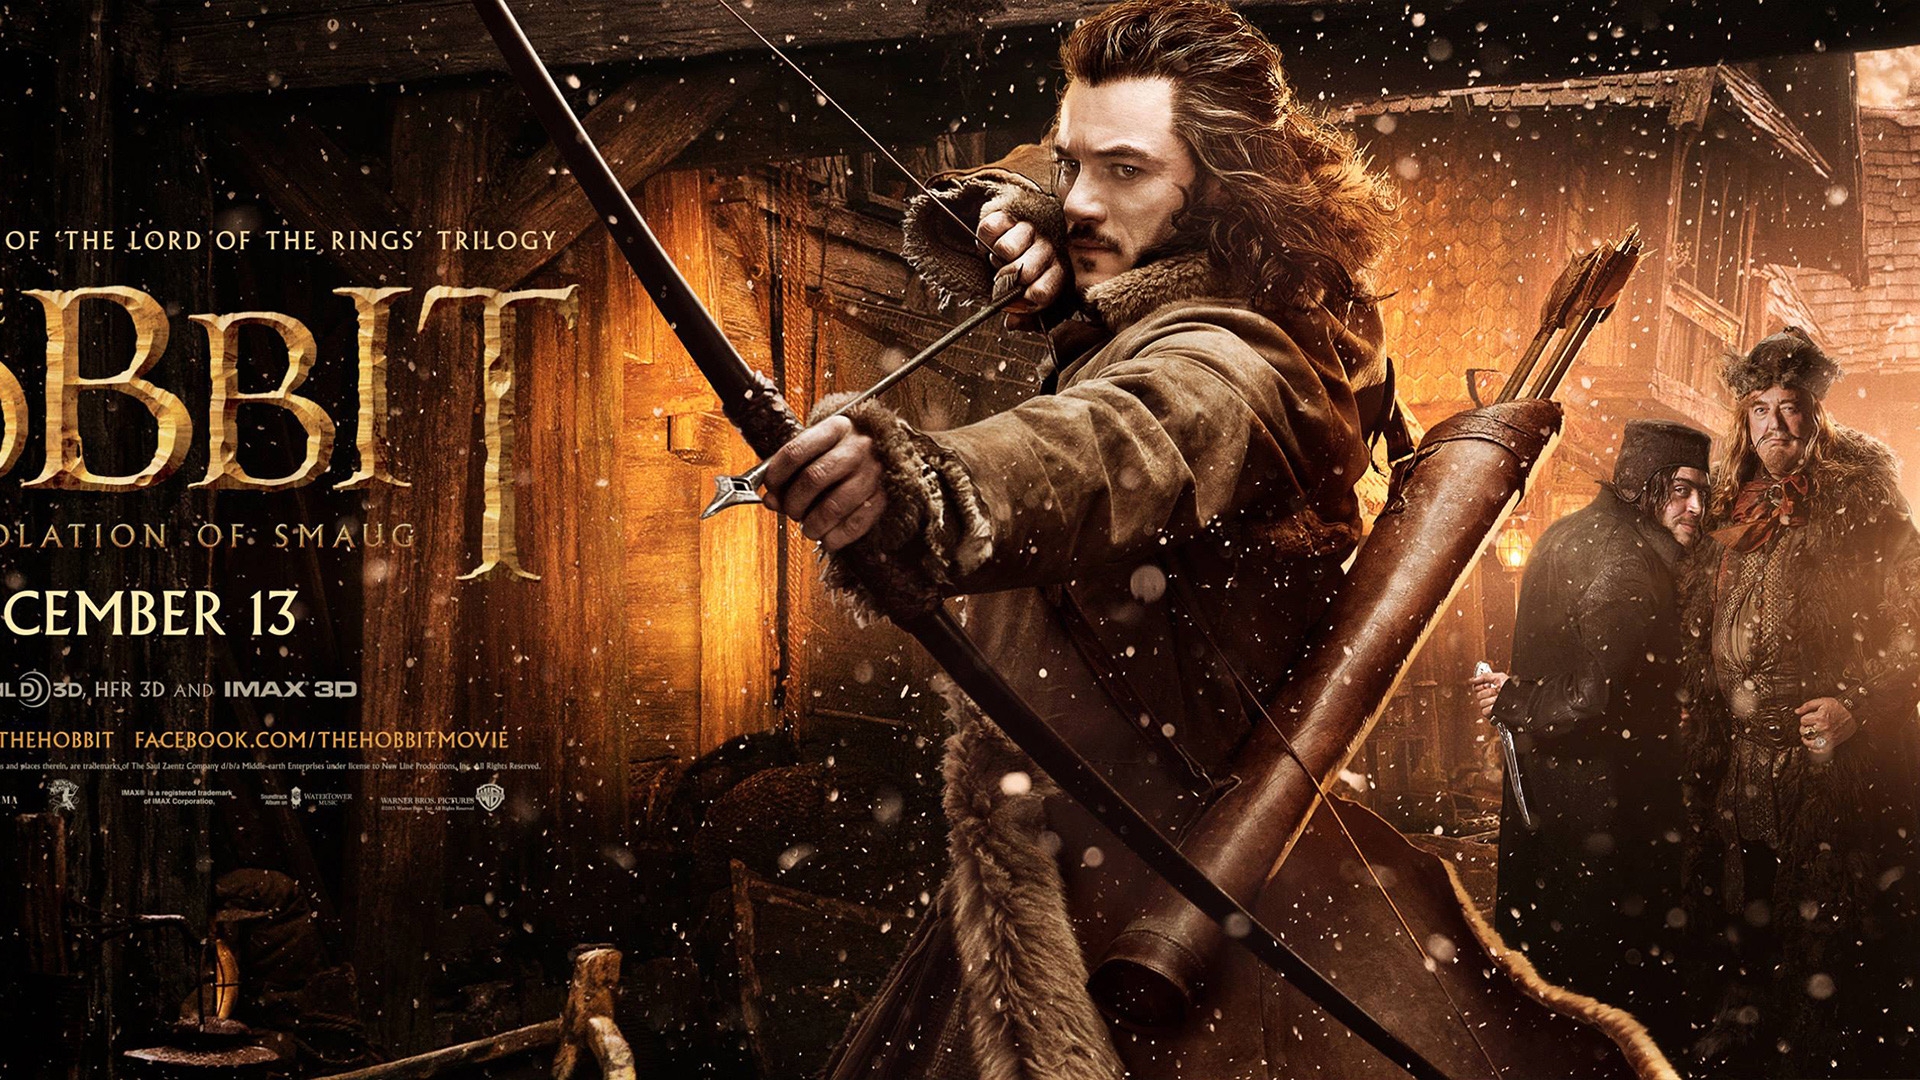 Bard the Bowman The Hobbit for 1920 x 1080 HDTV 1080p resolution